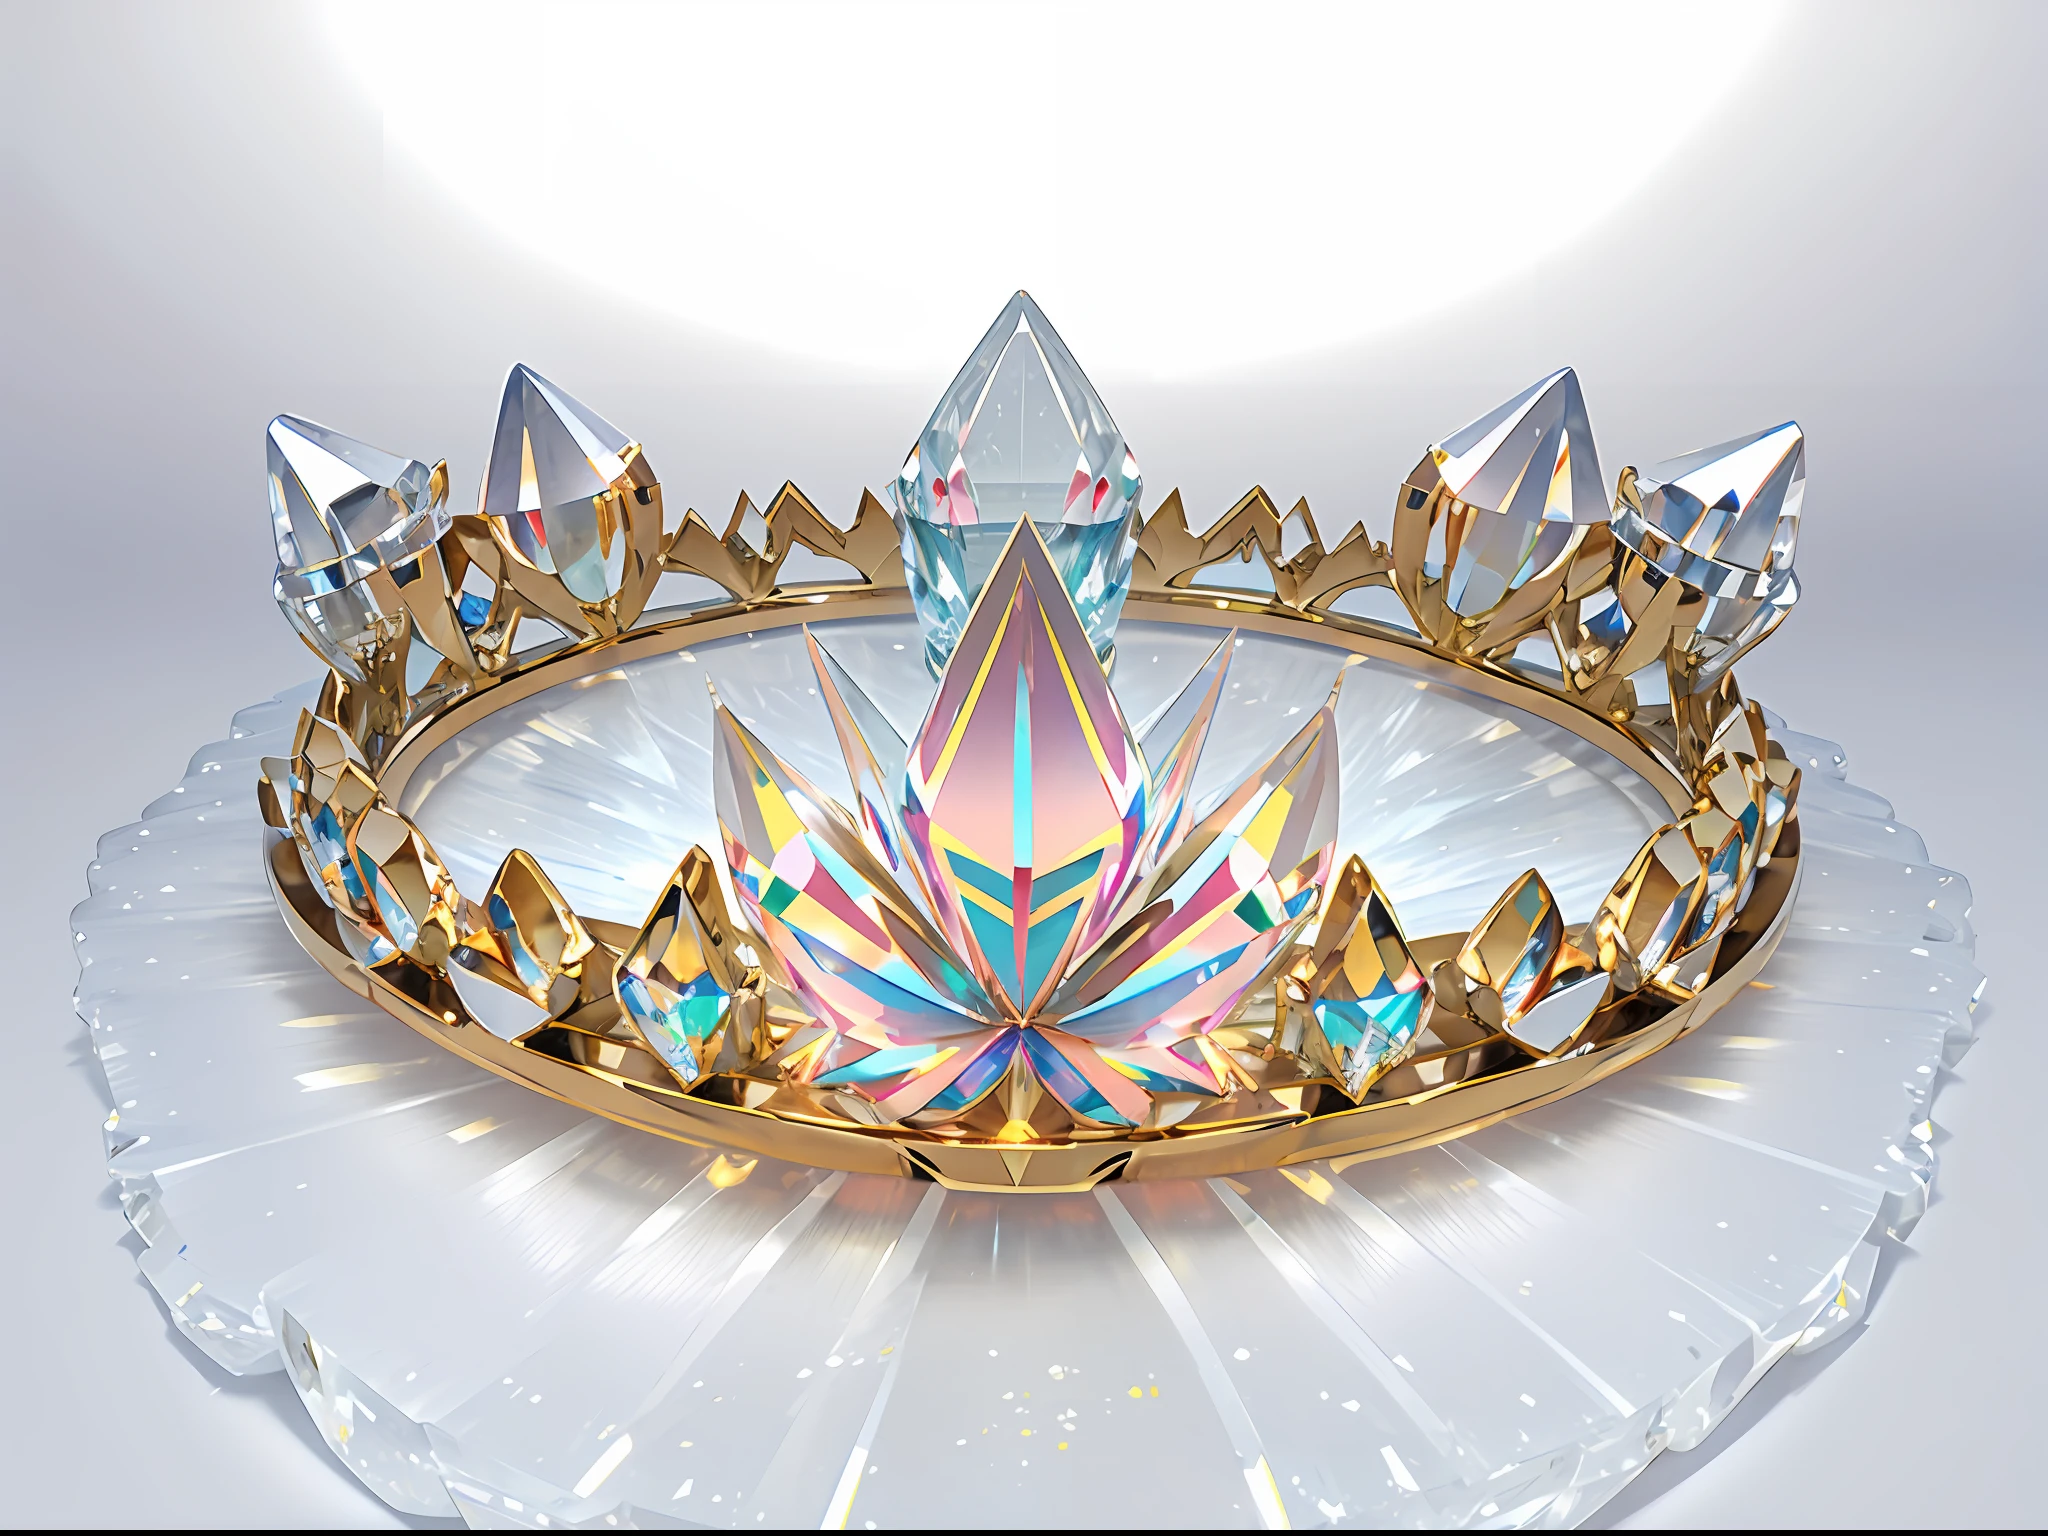 8k, (crown close-up), positive perspective!! , with a diamond crown on a white background, diamond wings!! ,(((((Ring Crown)))),(White Crown))))),(White Crystal)))),((Left and Right Symmetrical Crown)),(Slender Crown)))),(Smooth Lines)),Gorgeous and Colorful,(((Colorful)), Complex Diamonds, Ultra-realistic Fantasy Crown, Crystal Crown, Crystal Crown, White Laser Crown, Crystal Corolla, Floating Crown, (Ray Tracing), ((Clean Background)), Crown, Flower Crown, Crown, Giant Diamond Crown, Diamond Headdress, Amazing flower crown, diamond crown --auto --s2